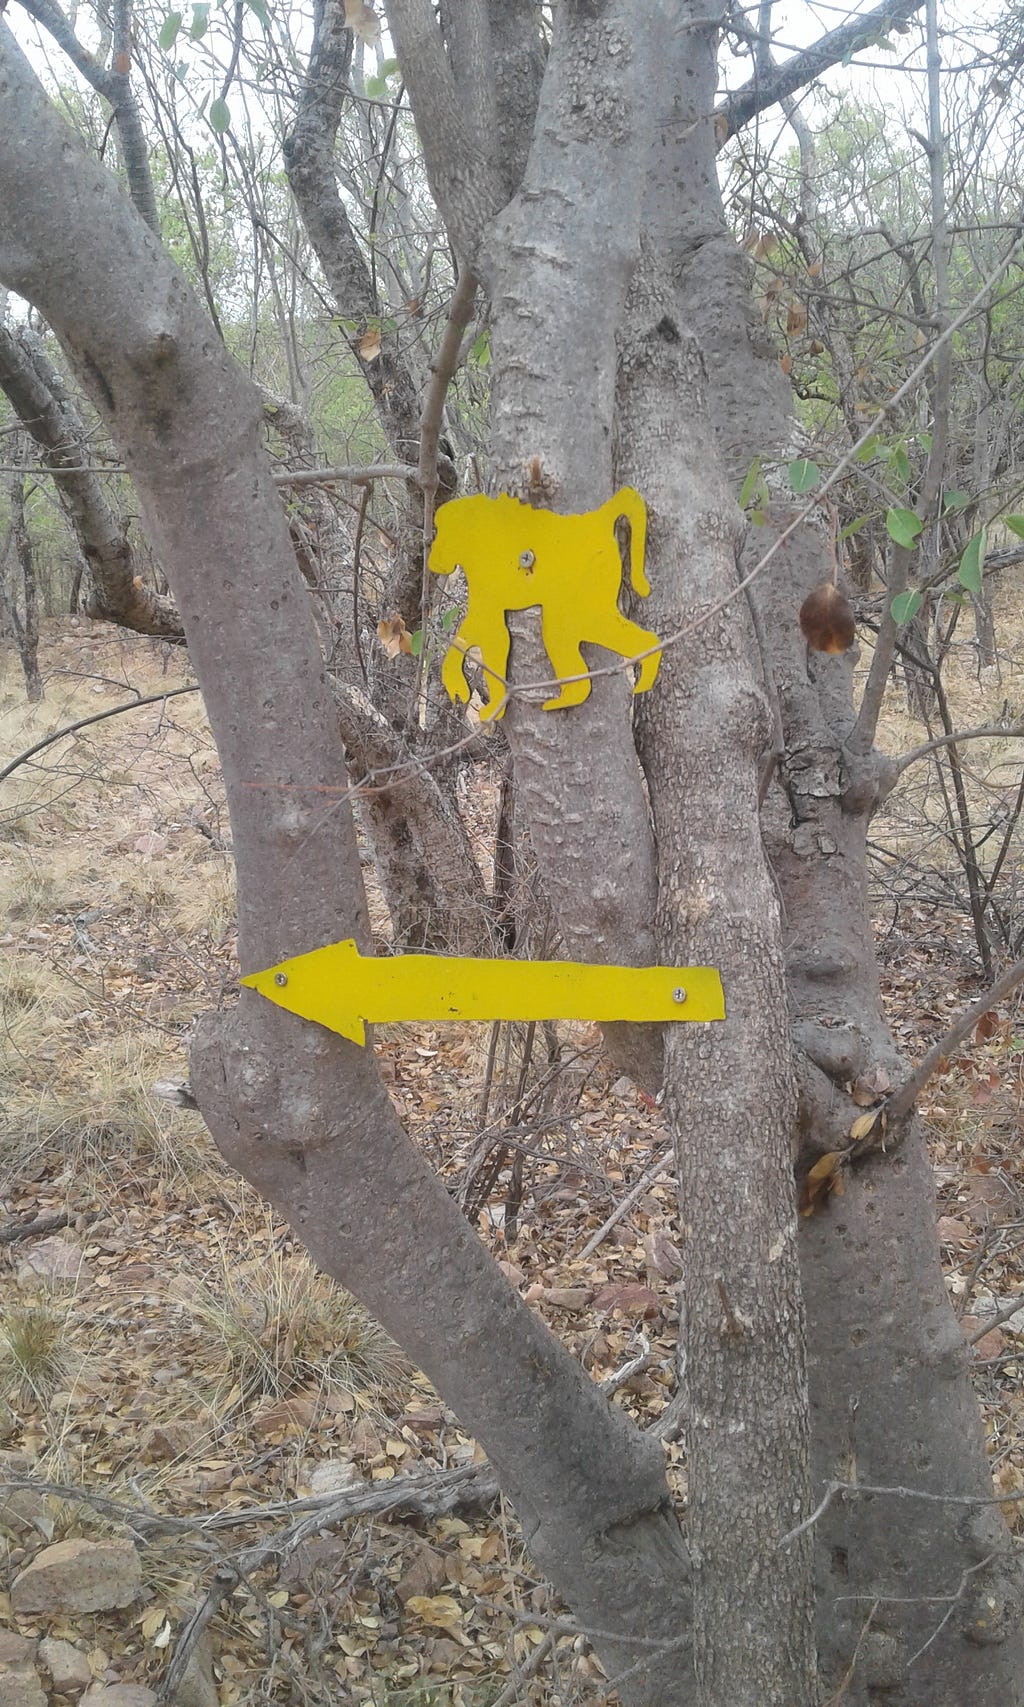 A yellow baboon-shaped signboard and arrow, nailed to a tree, indicating a hiking trail in the bush